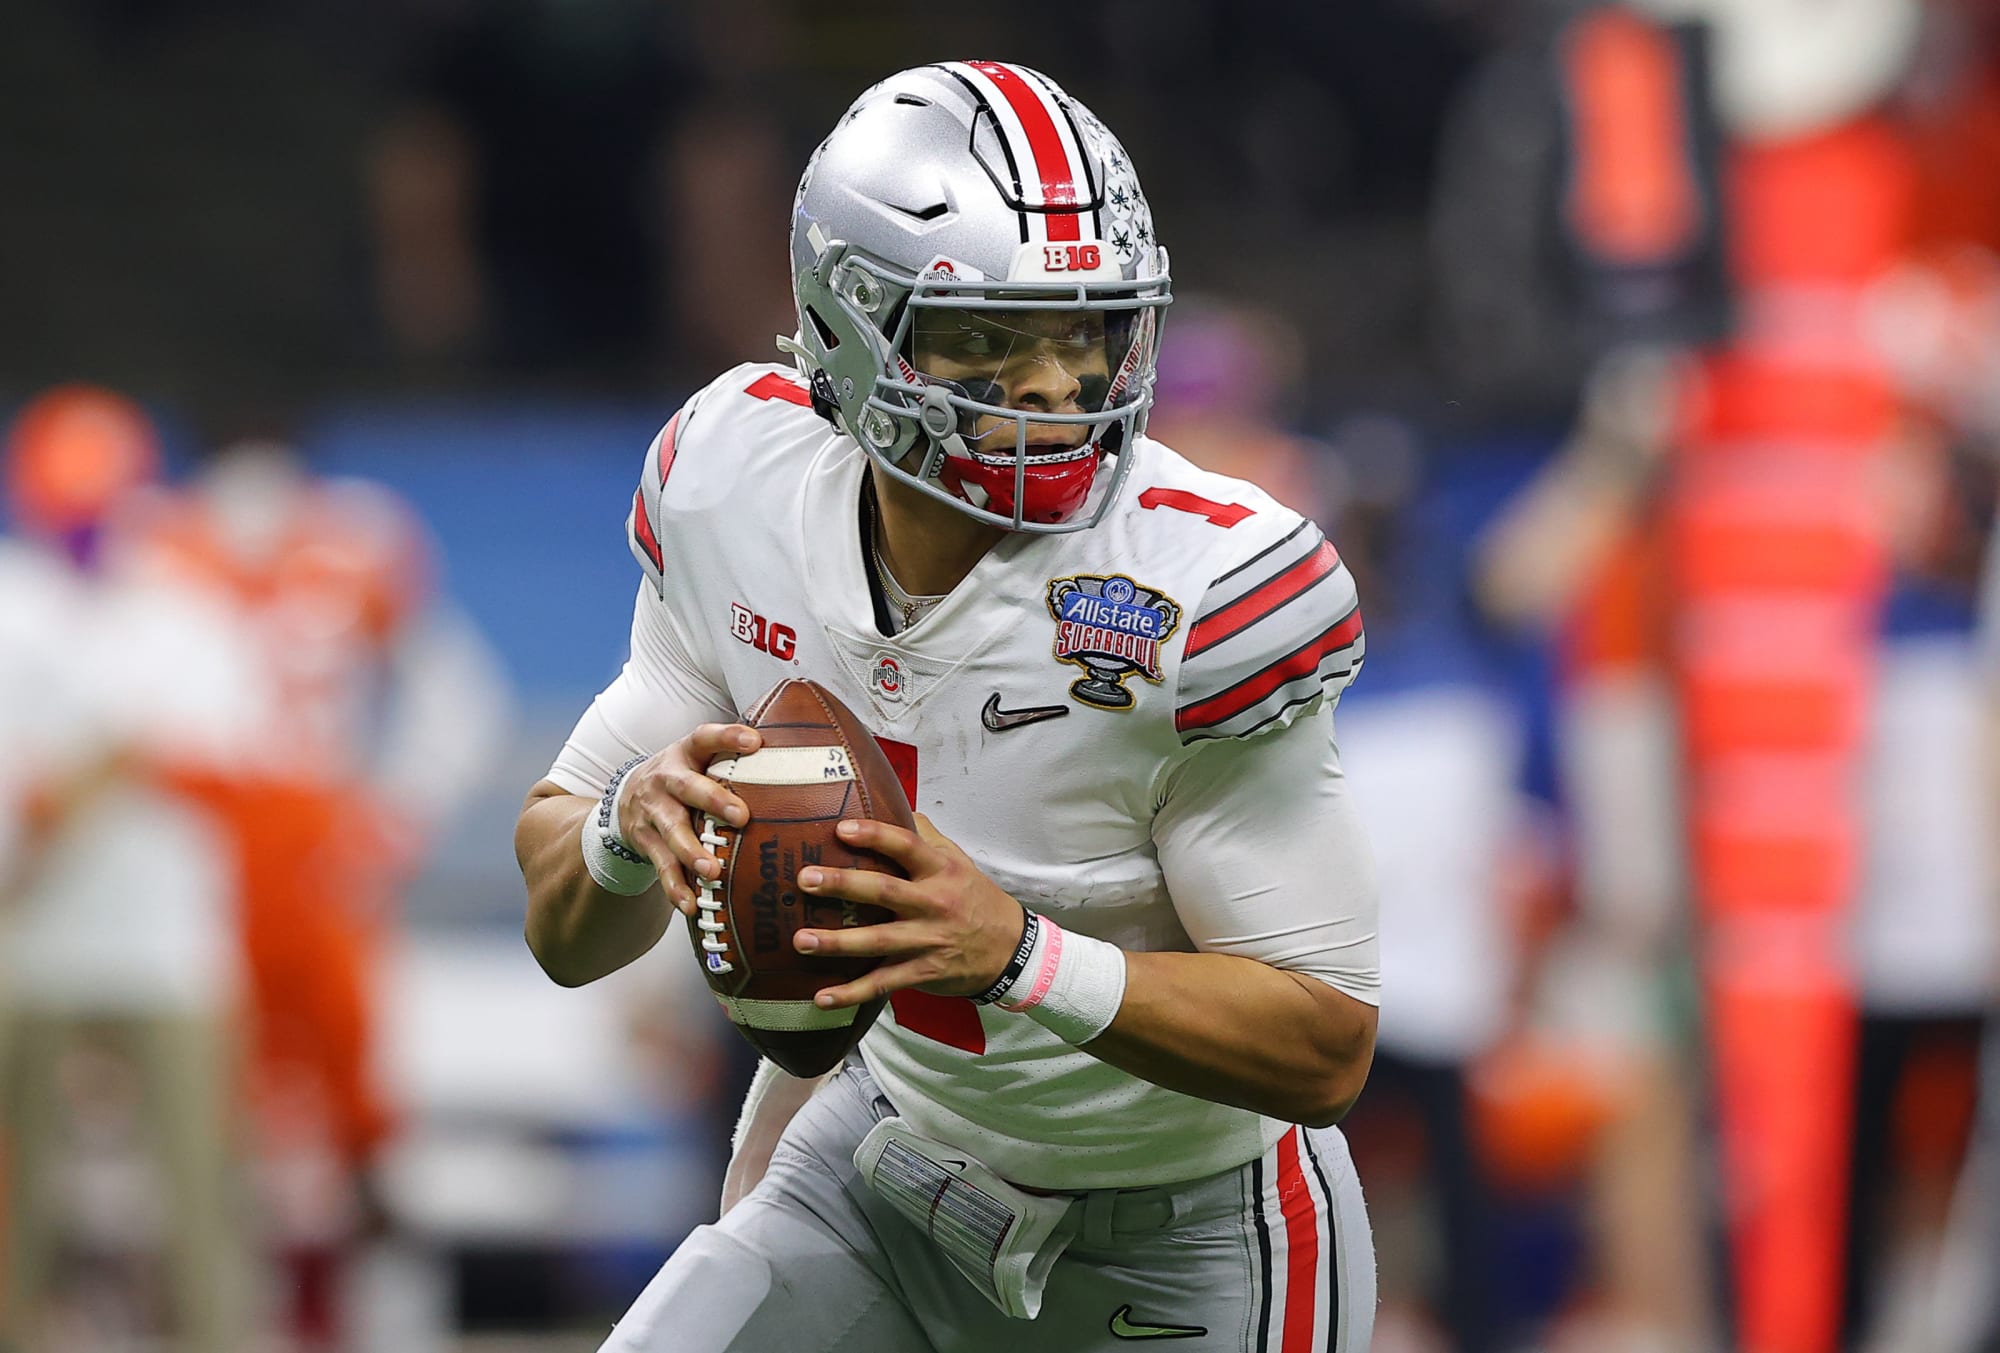 31 Top Pictures Nfl Draft Game 2021 - 2021 NFL Mock Draft: Steelers, Lions take QBs as six go in ...